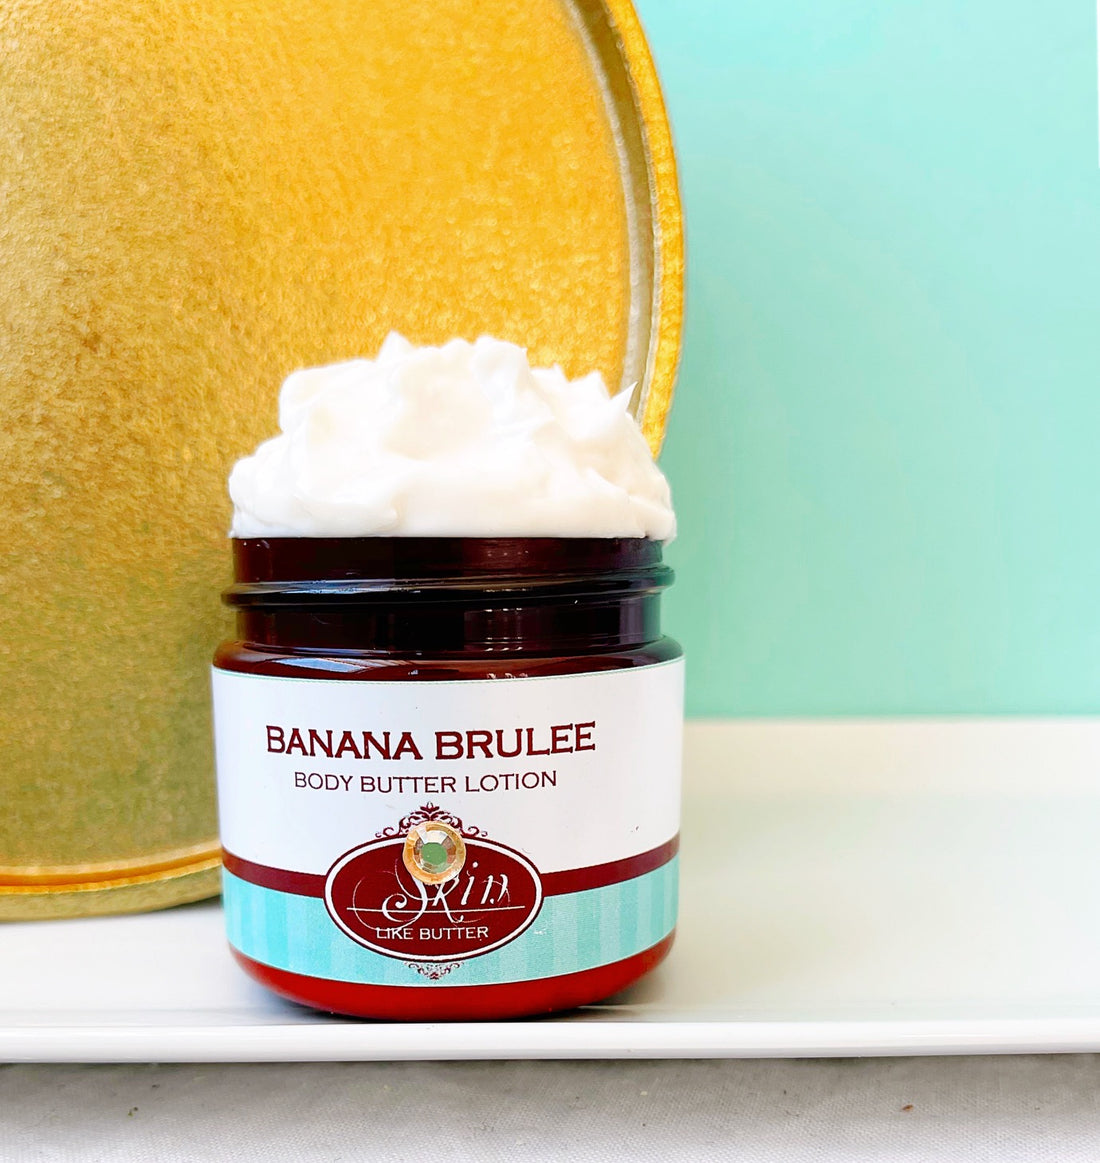 BANANA SPICE scented Body Butter, waterfree and non-greasy, vegan